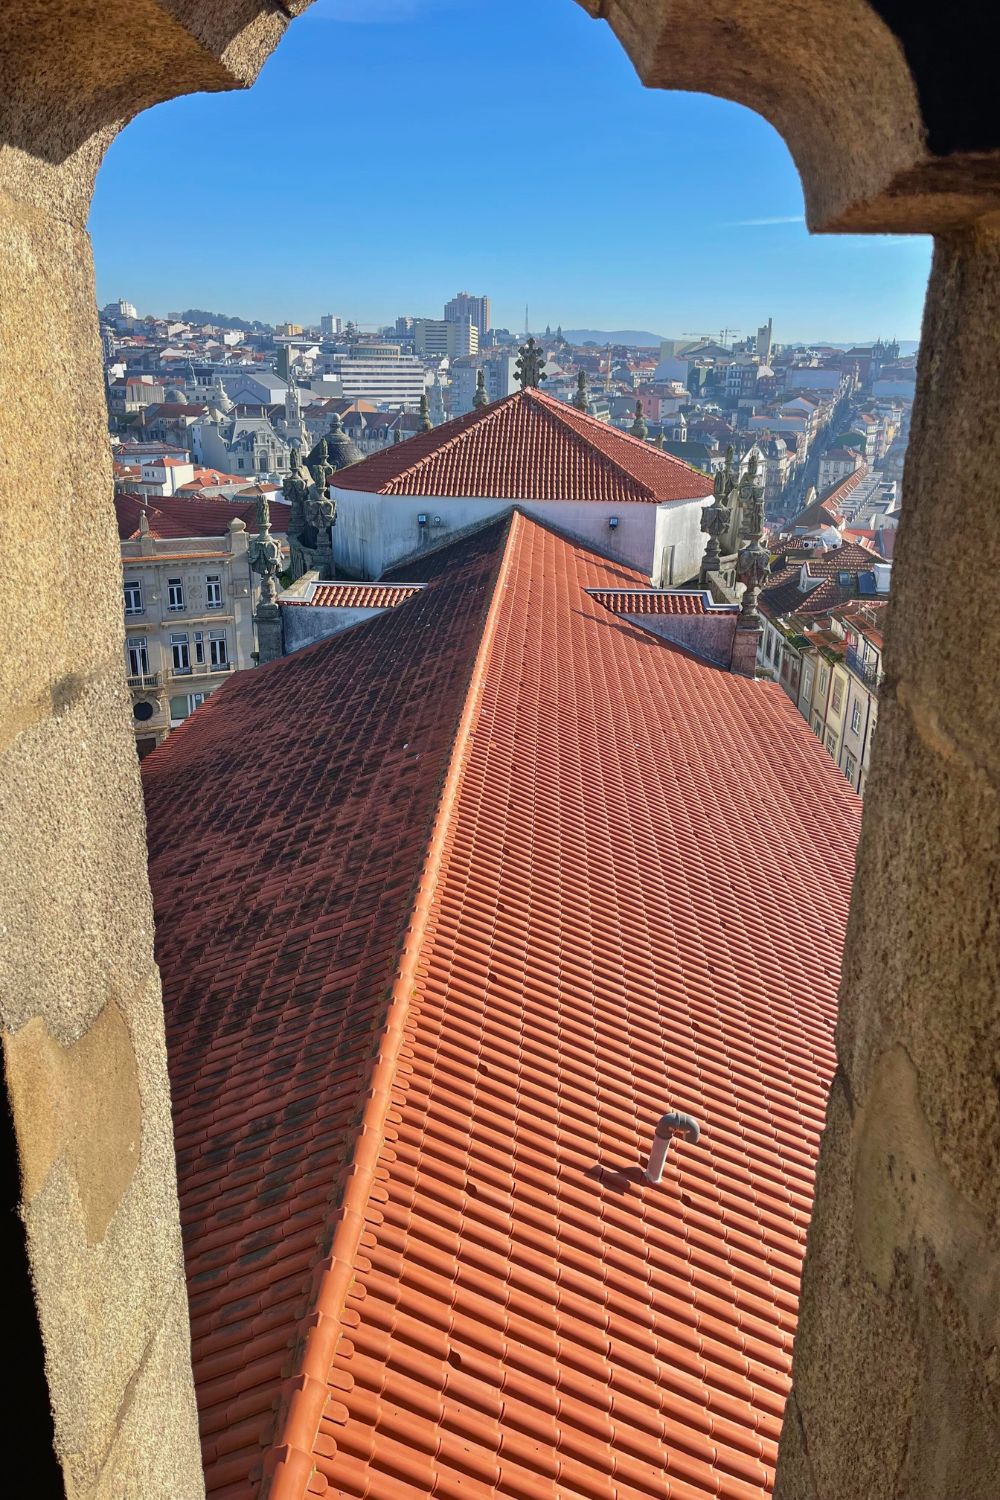 View from a stone archway over the terracotta rooftops of Porto, with the city's buildings stretching into the distance under a clear blue sky.